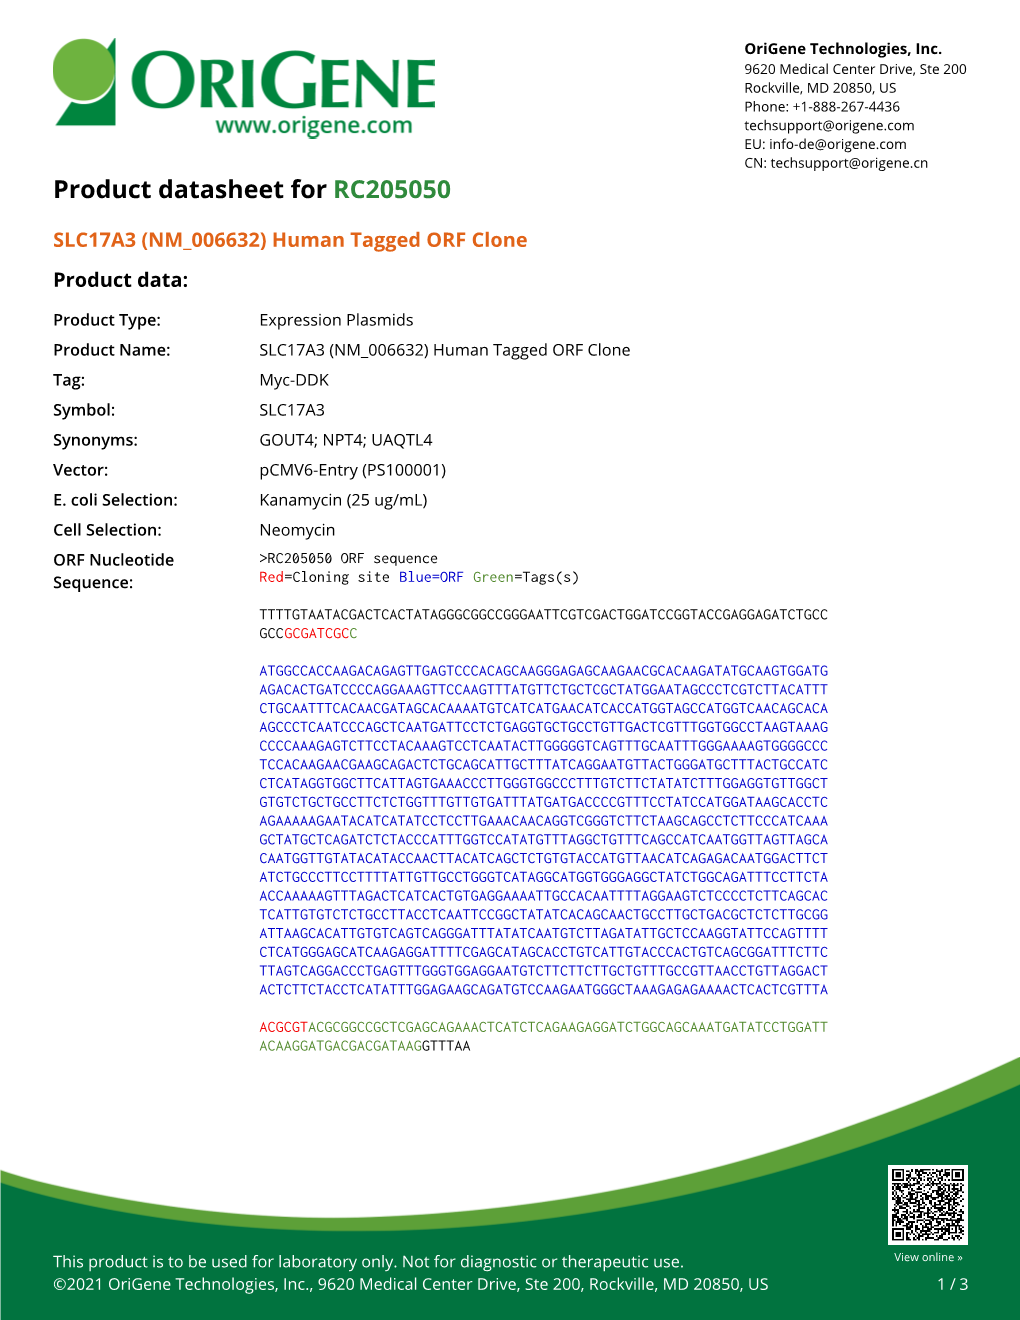 SLC17A3 (NM 006632) Human Tagged ORF Clone Product Data